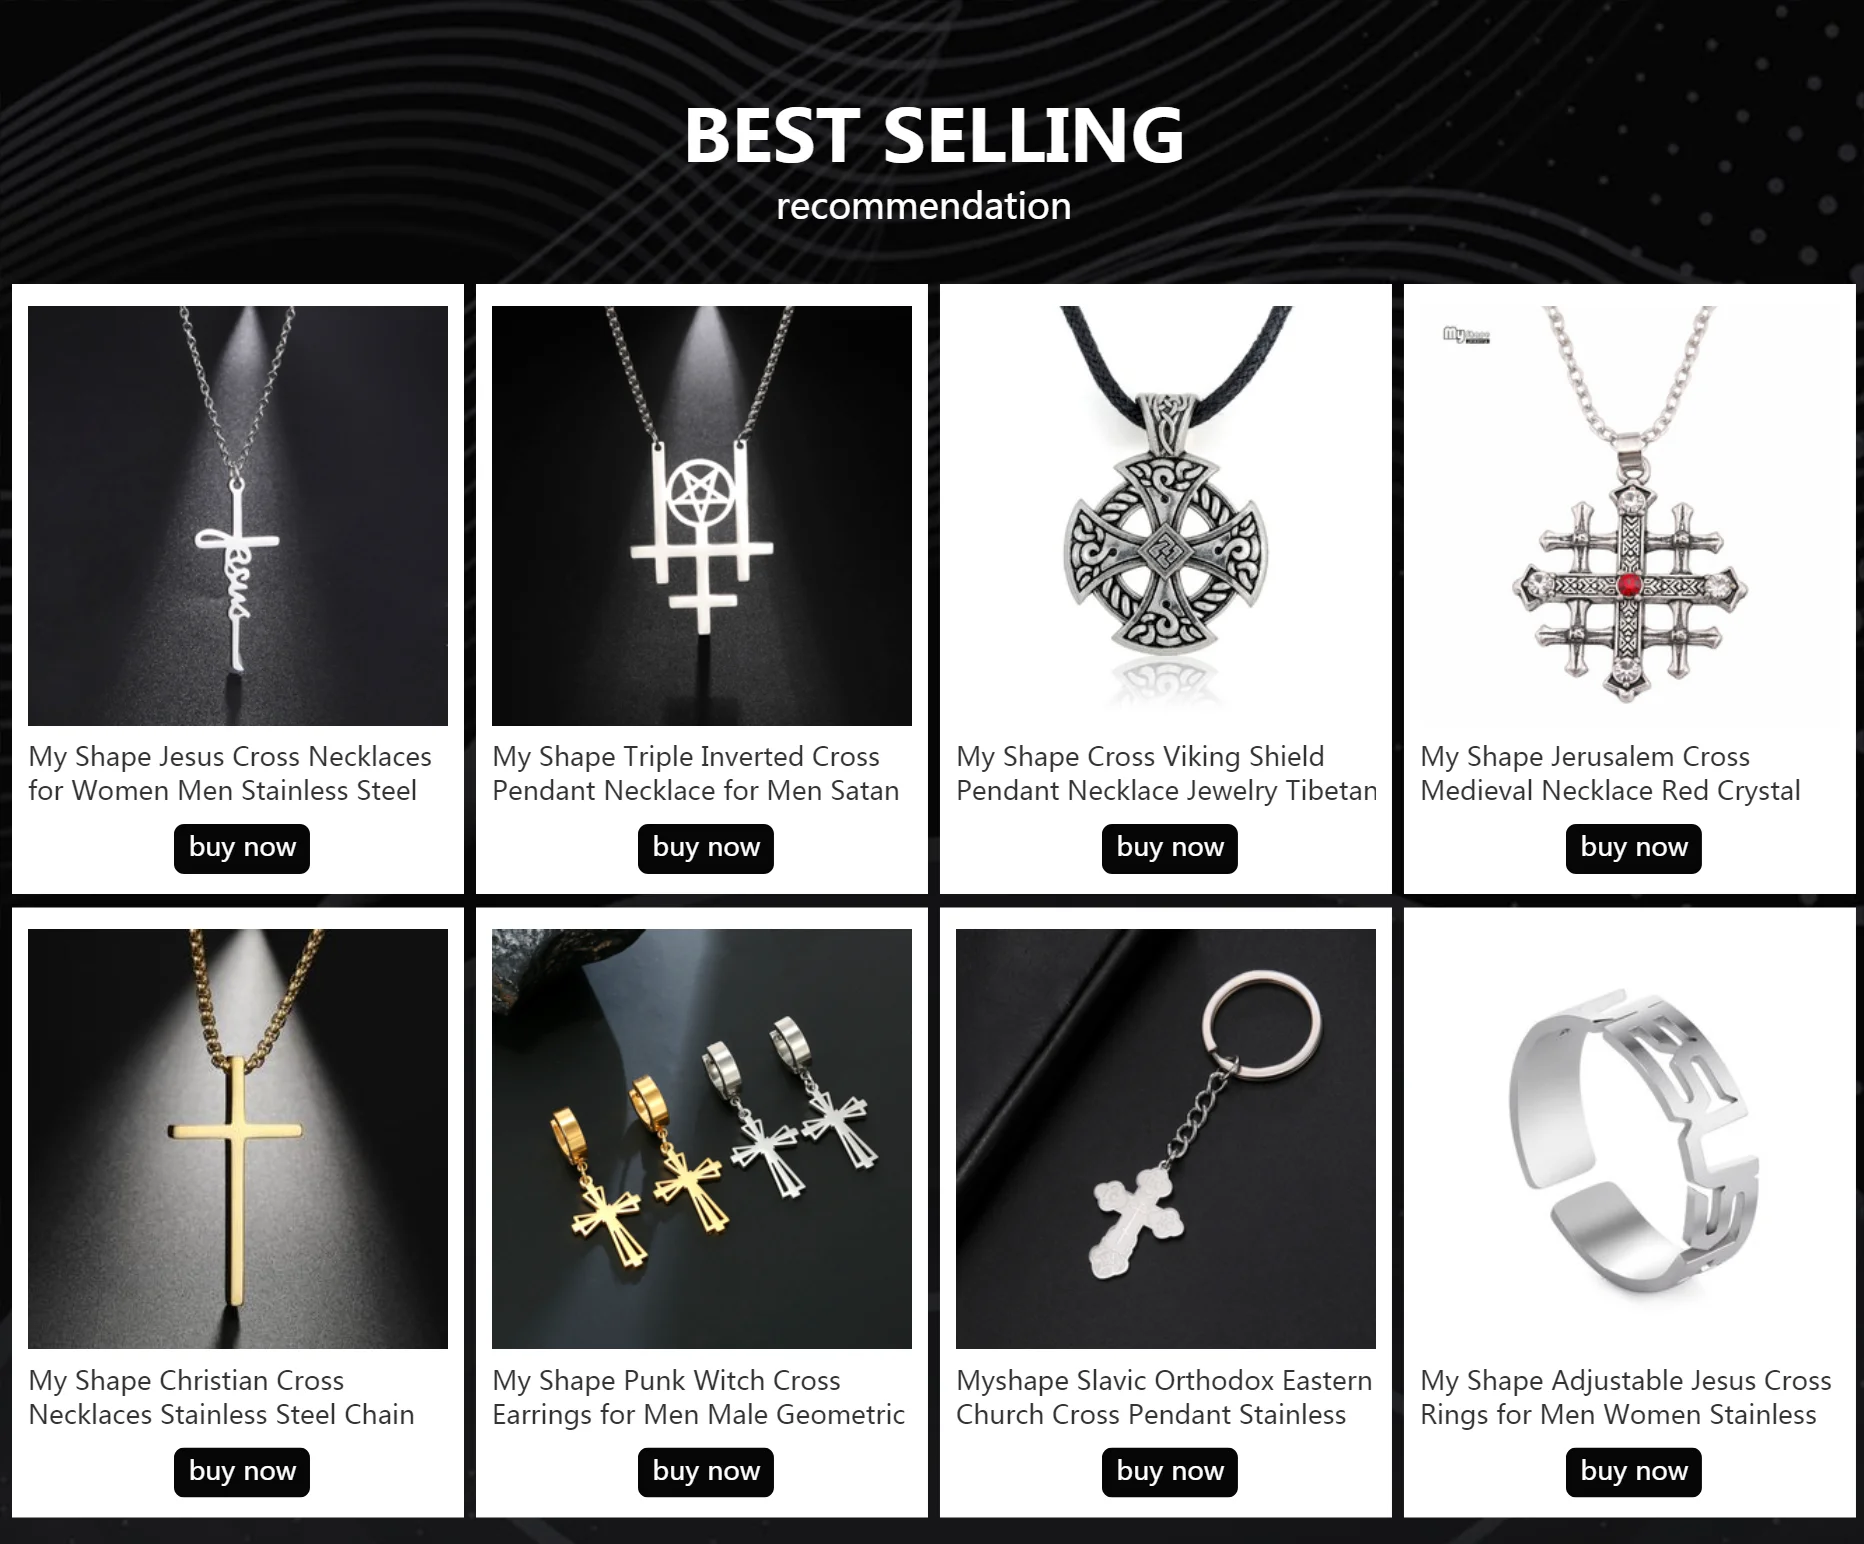 My Shape Jesus Cross Necklaces for Women Men Stainless Steel Pendant Necklace Choker Religious Christian Jewelry Christmas Gift